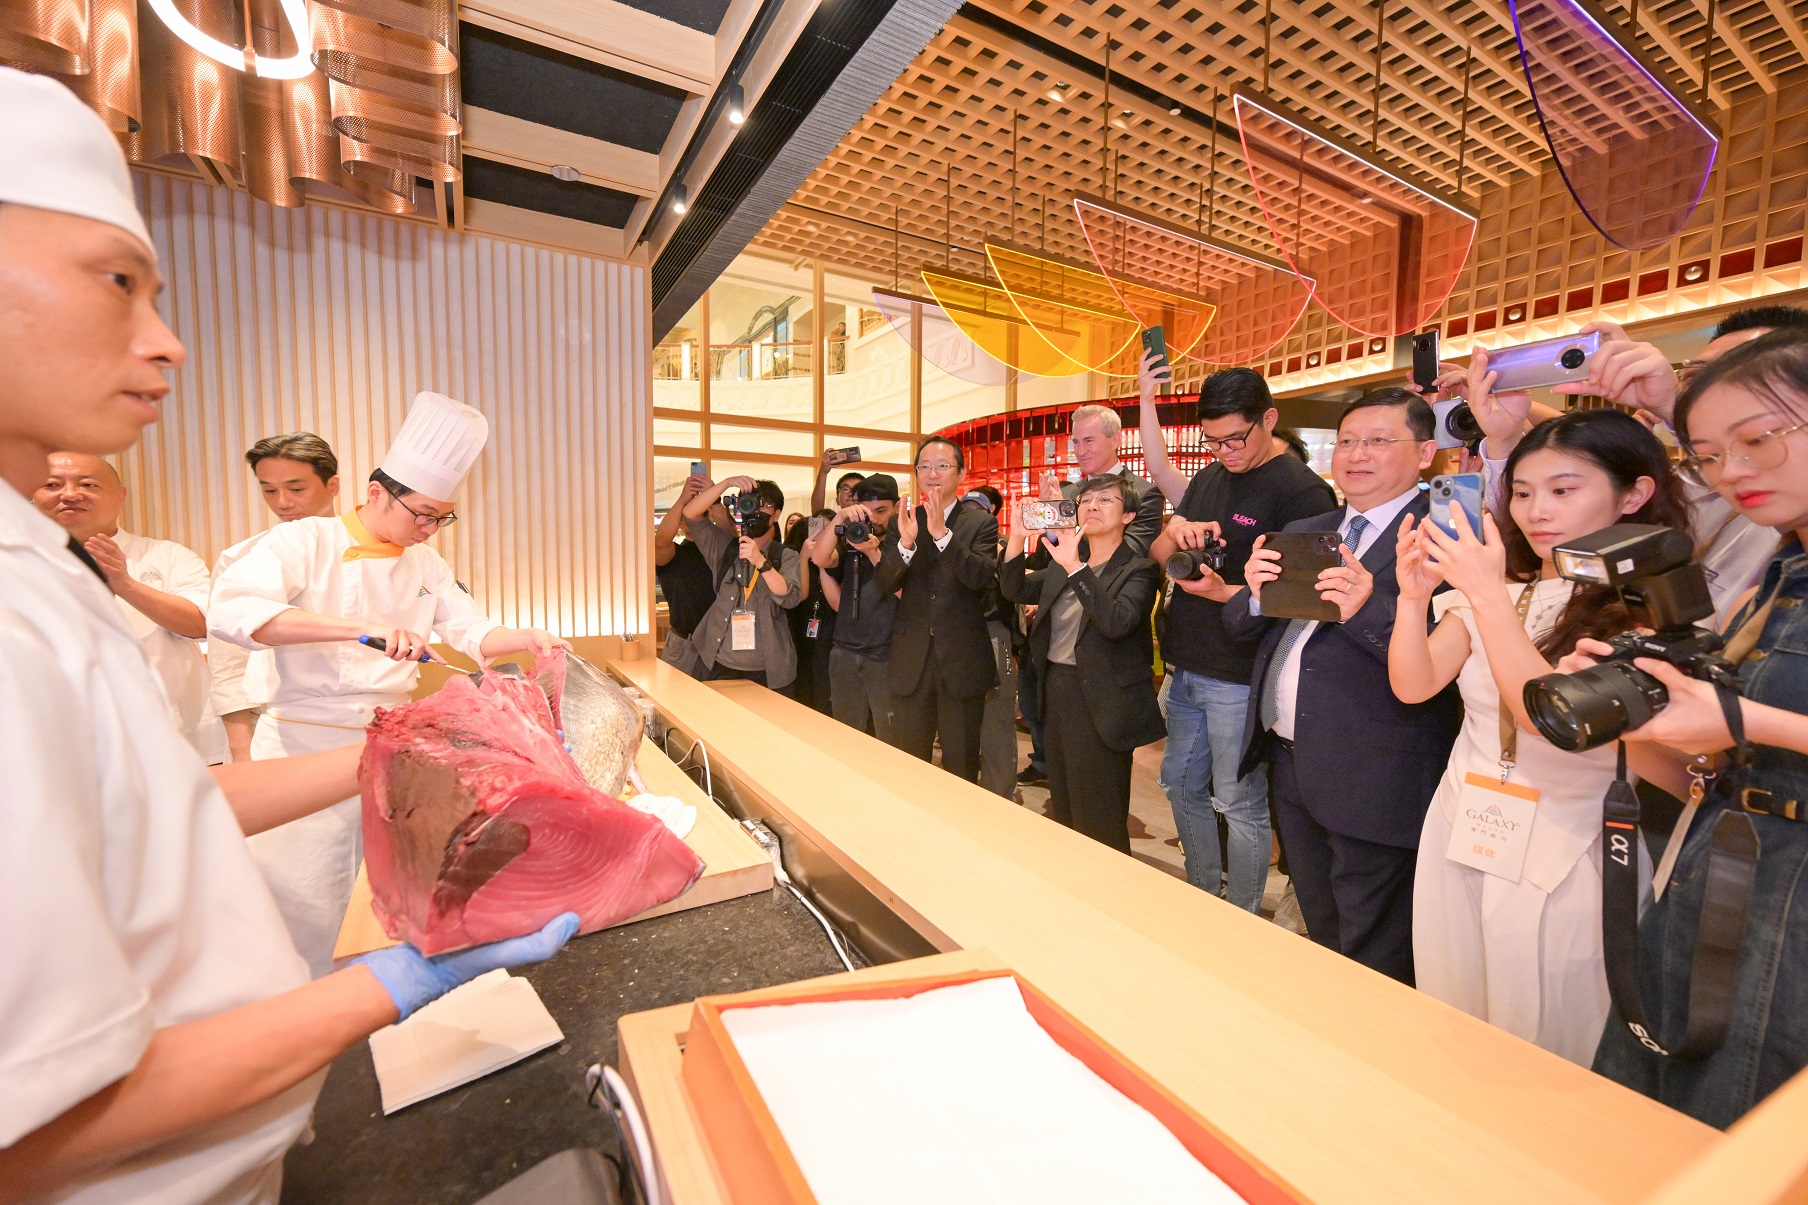 At the opening ceremony, the chef team of Kyo Watami showcased a live cutting of an 80-kilogram bluefin tuna directly imported from Nagasaki, Japan, for the guests.